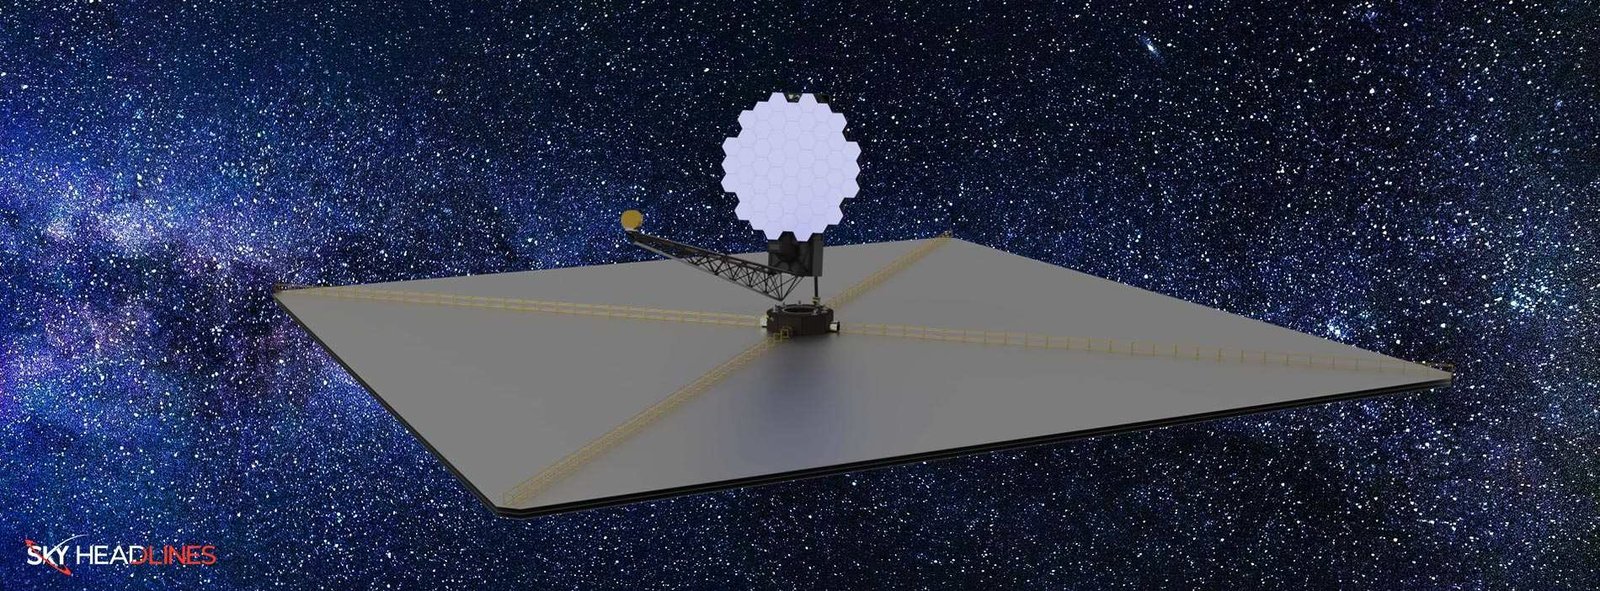 New Large Space Telescope